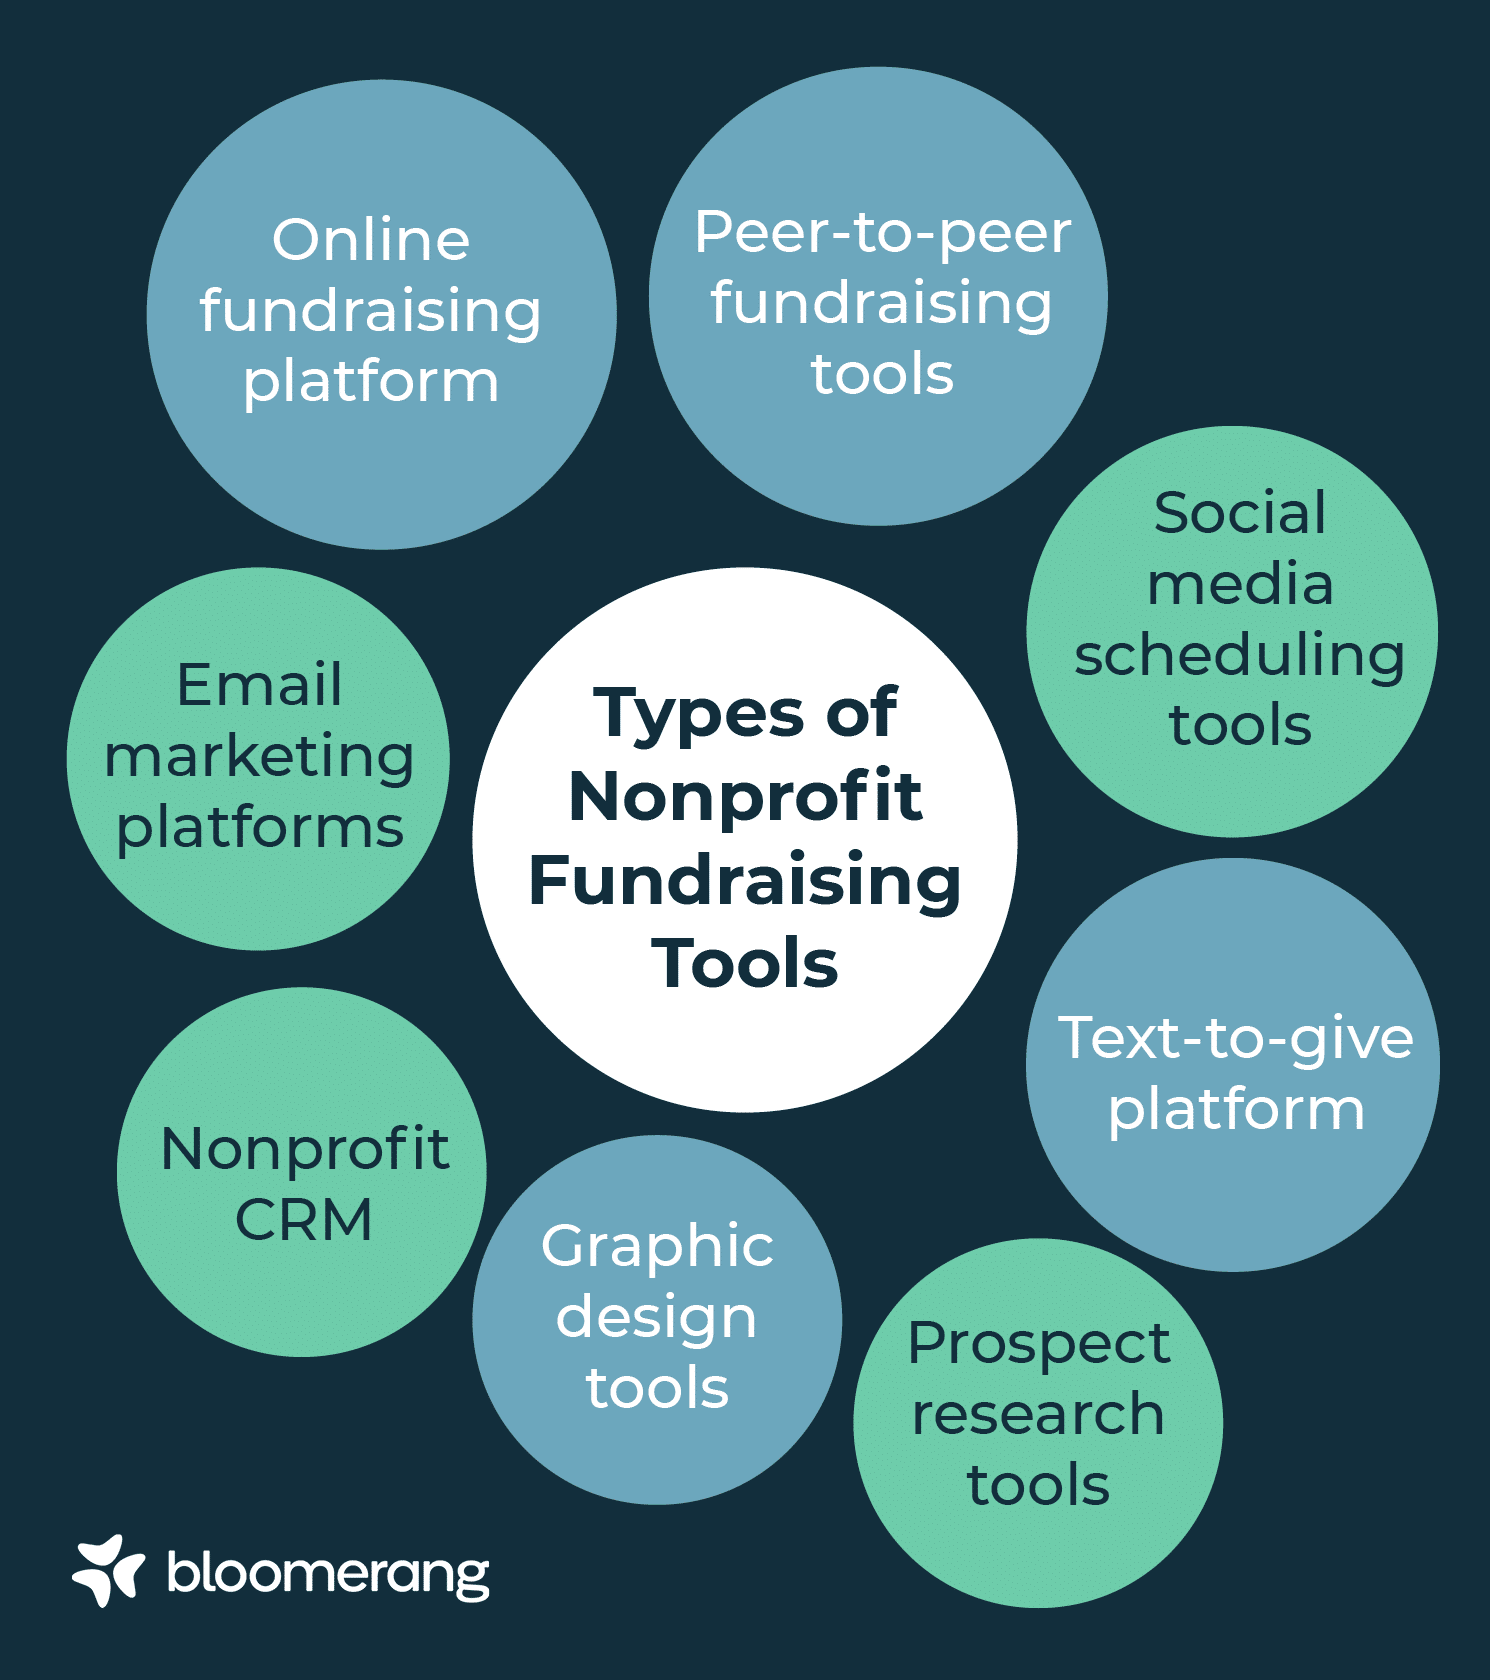 Common types of fundraising tools (listed below) 